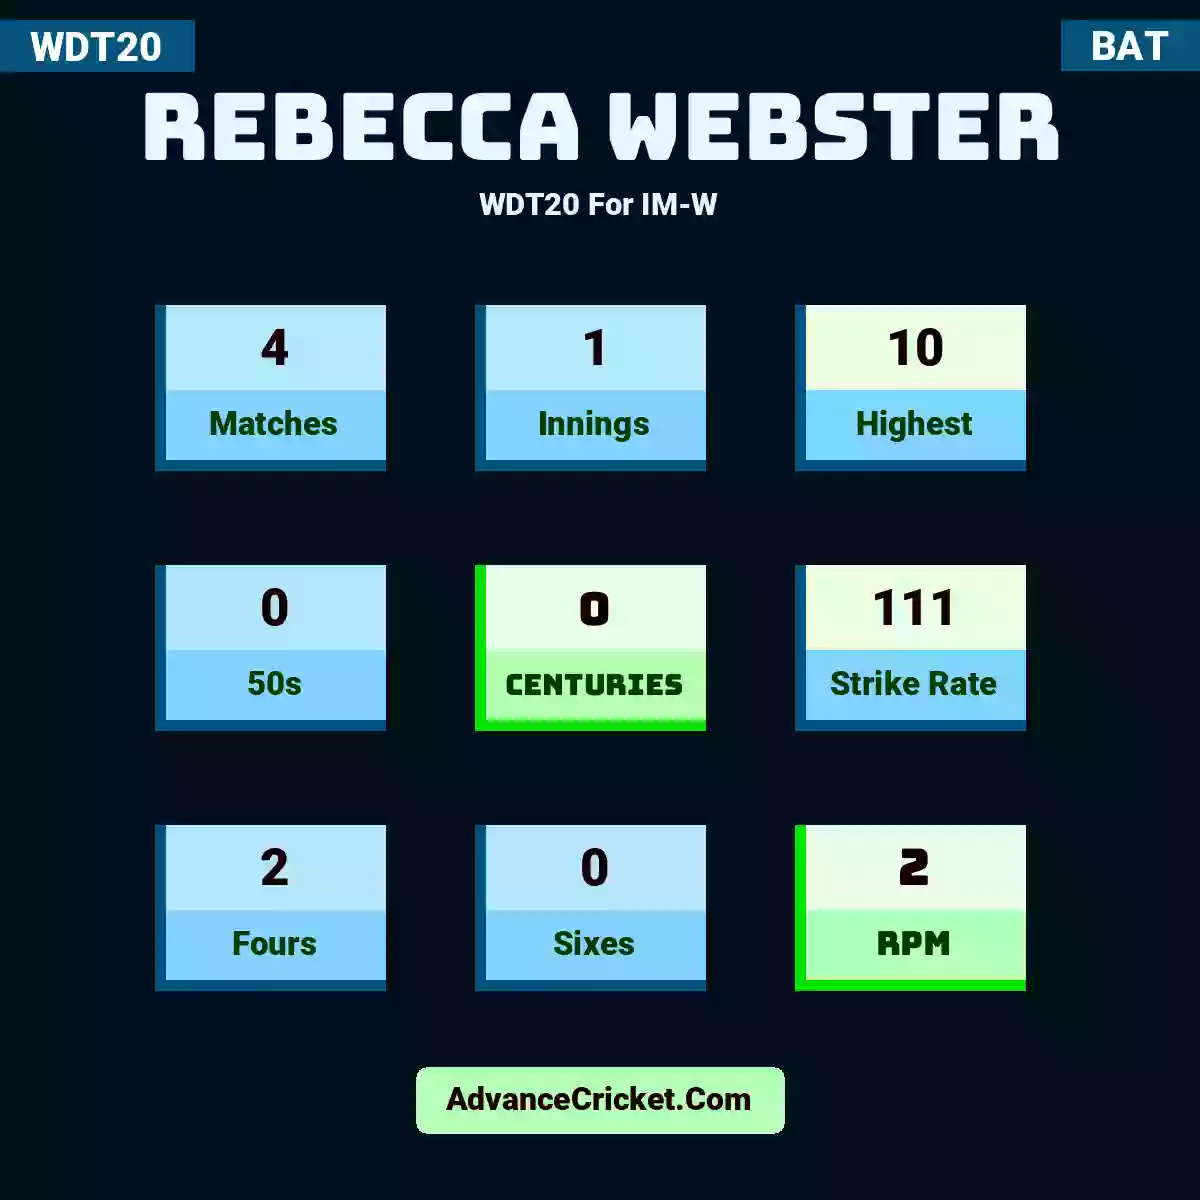 Rebecca Webster WDT20  For IM-W, Rebecca Webster played 4 matches, scored 10 runs as highest, 0 half-centuries, and 0 centuries, with a strike rate of 111. R.Webster hit 2 fours and 0 sixes, with an RPM of 2.